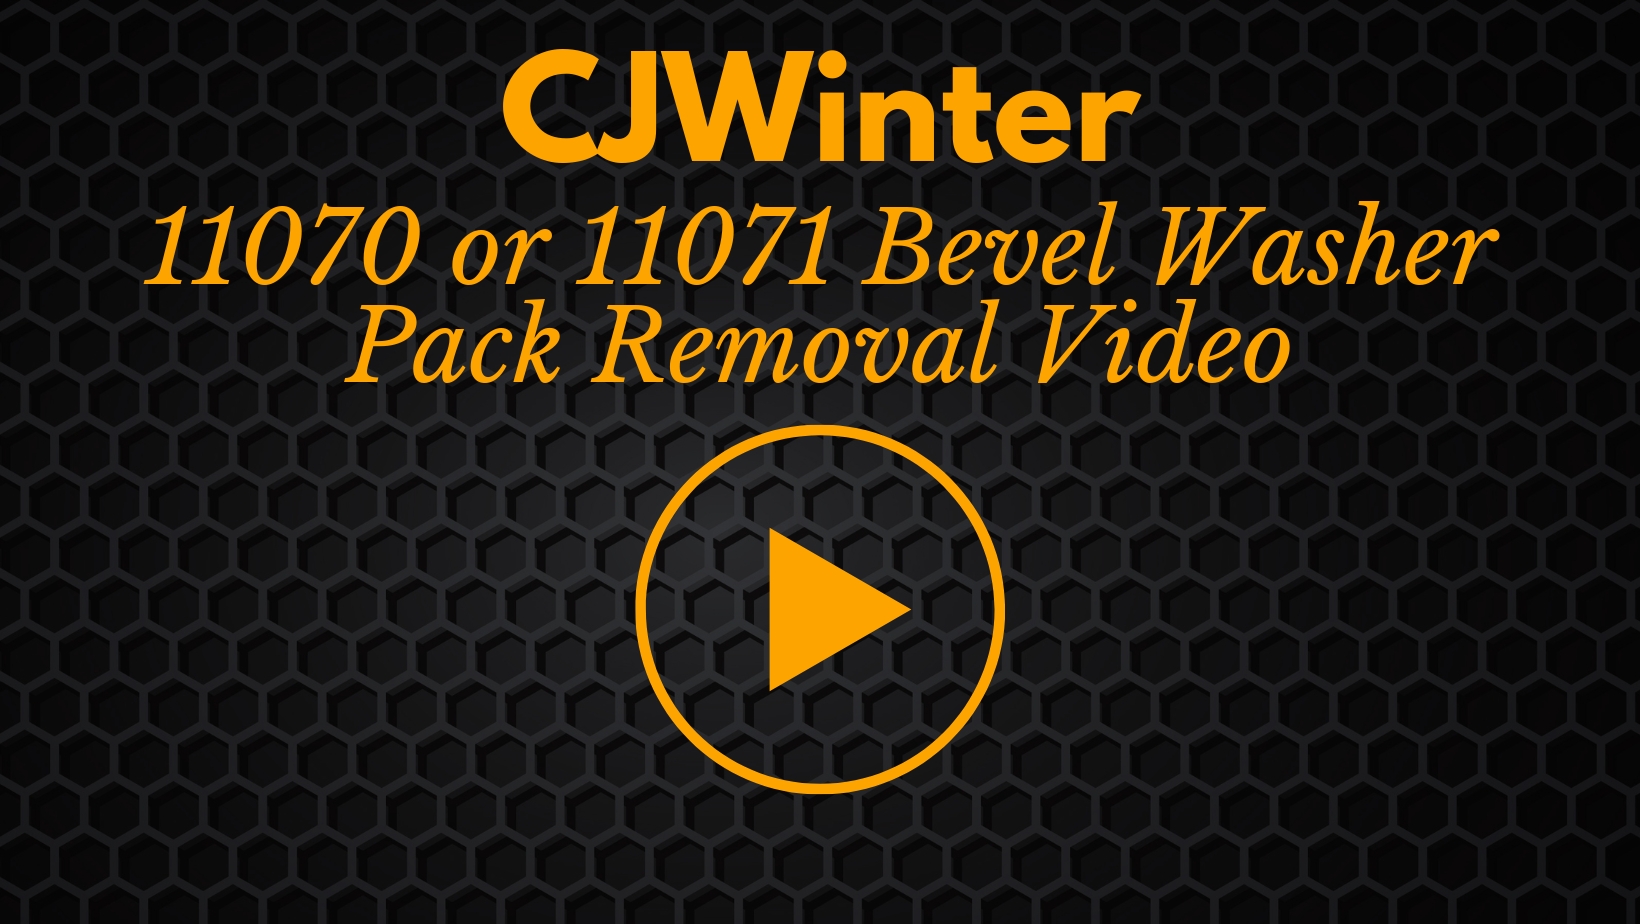 11070 or 11071 Bevel Washer Pack Removal